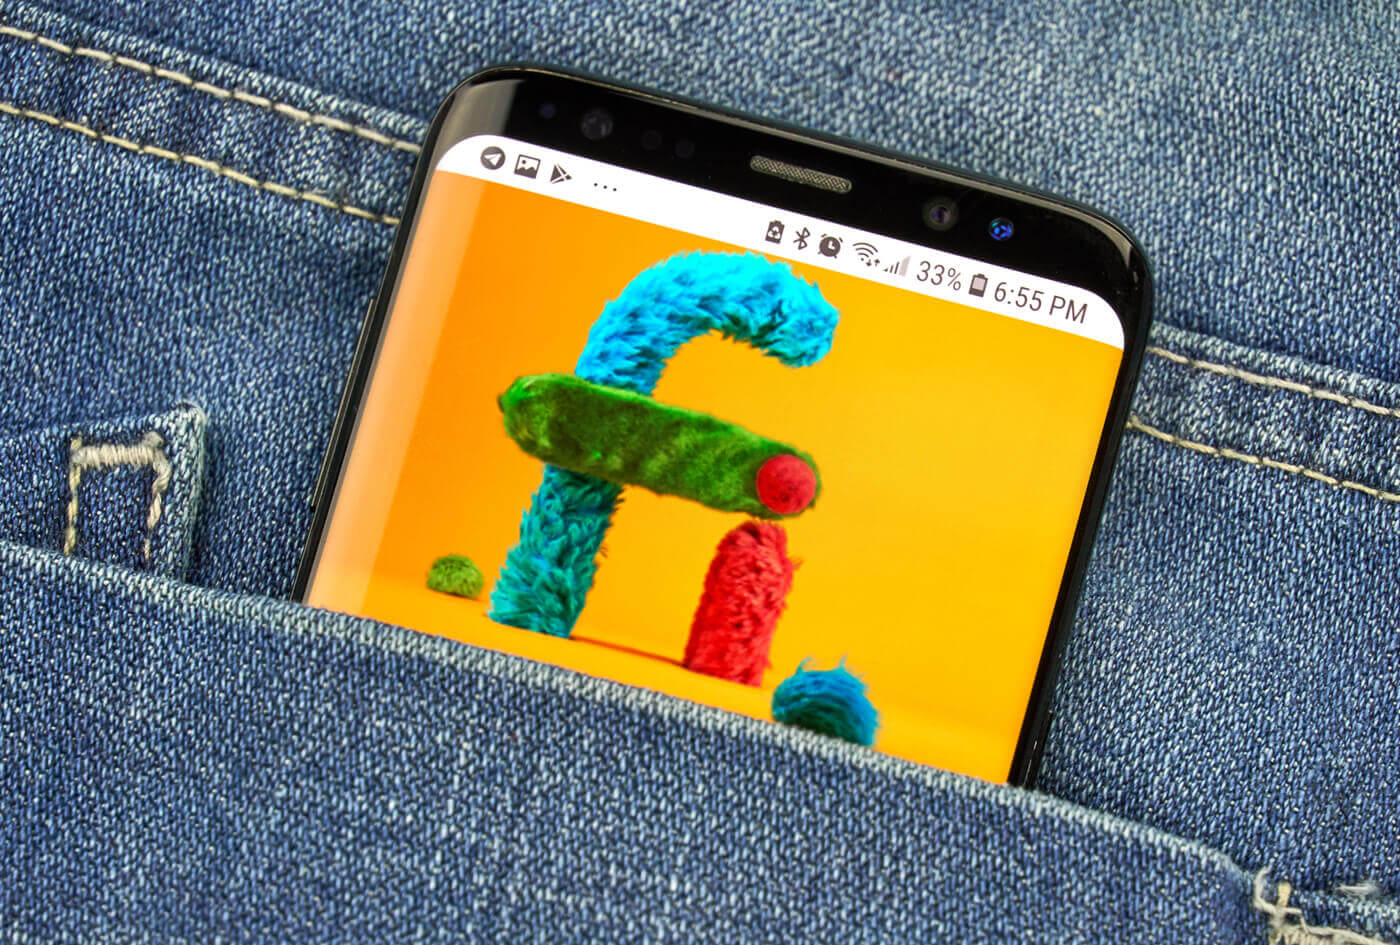 Google Fi temporarily increases data limits to 30GB per month, extends payment grace period